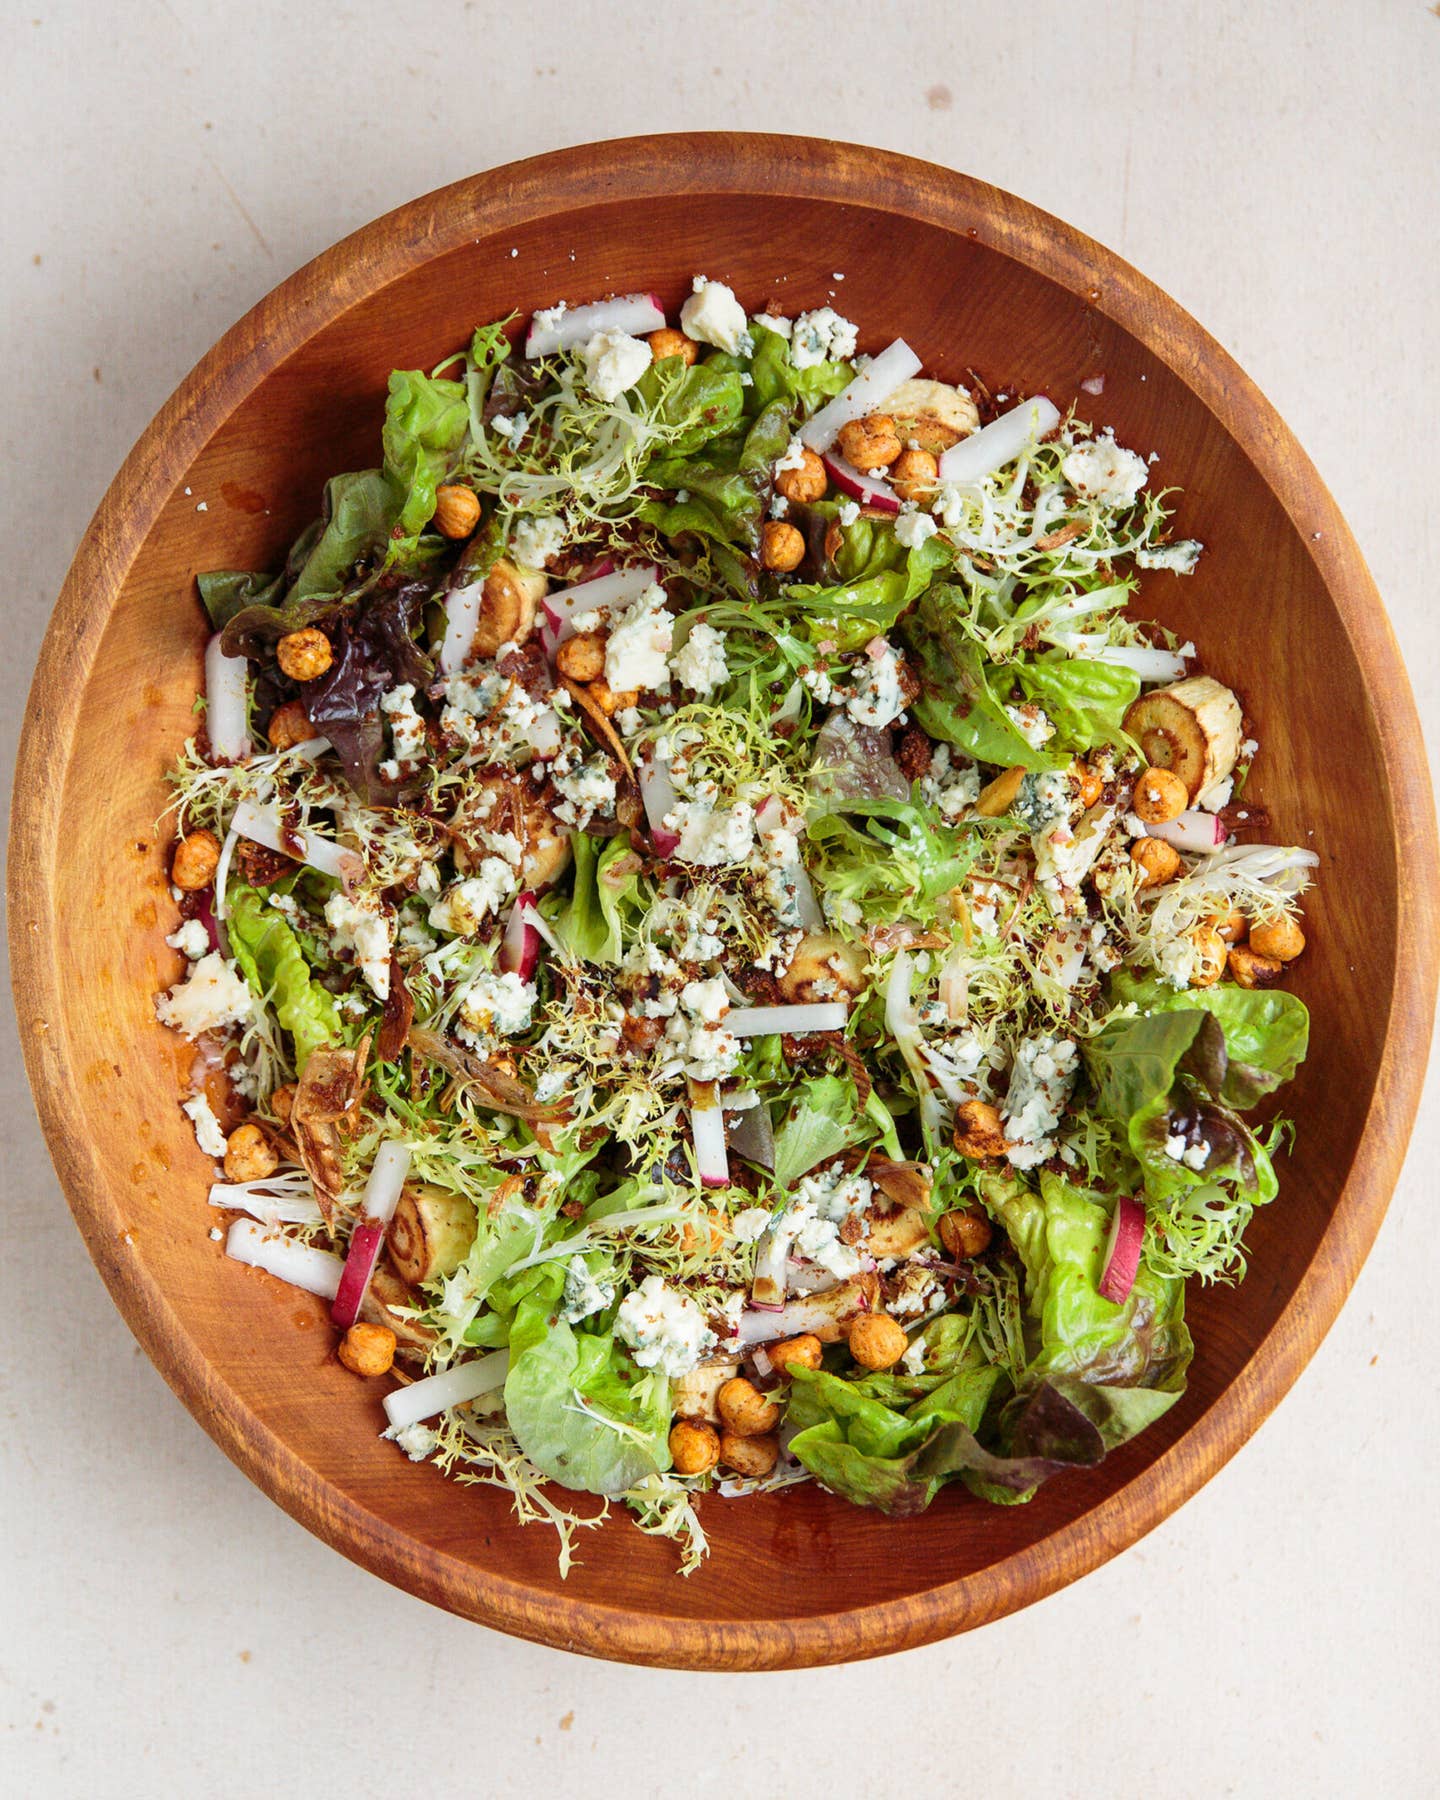 Roasted Parsnip Salad with Hazelnuts, Blue Cheese, and Wheat Beer Vinaigrette